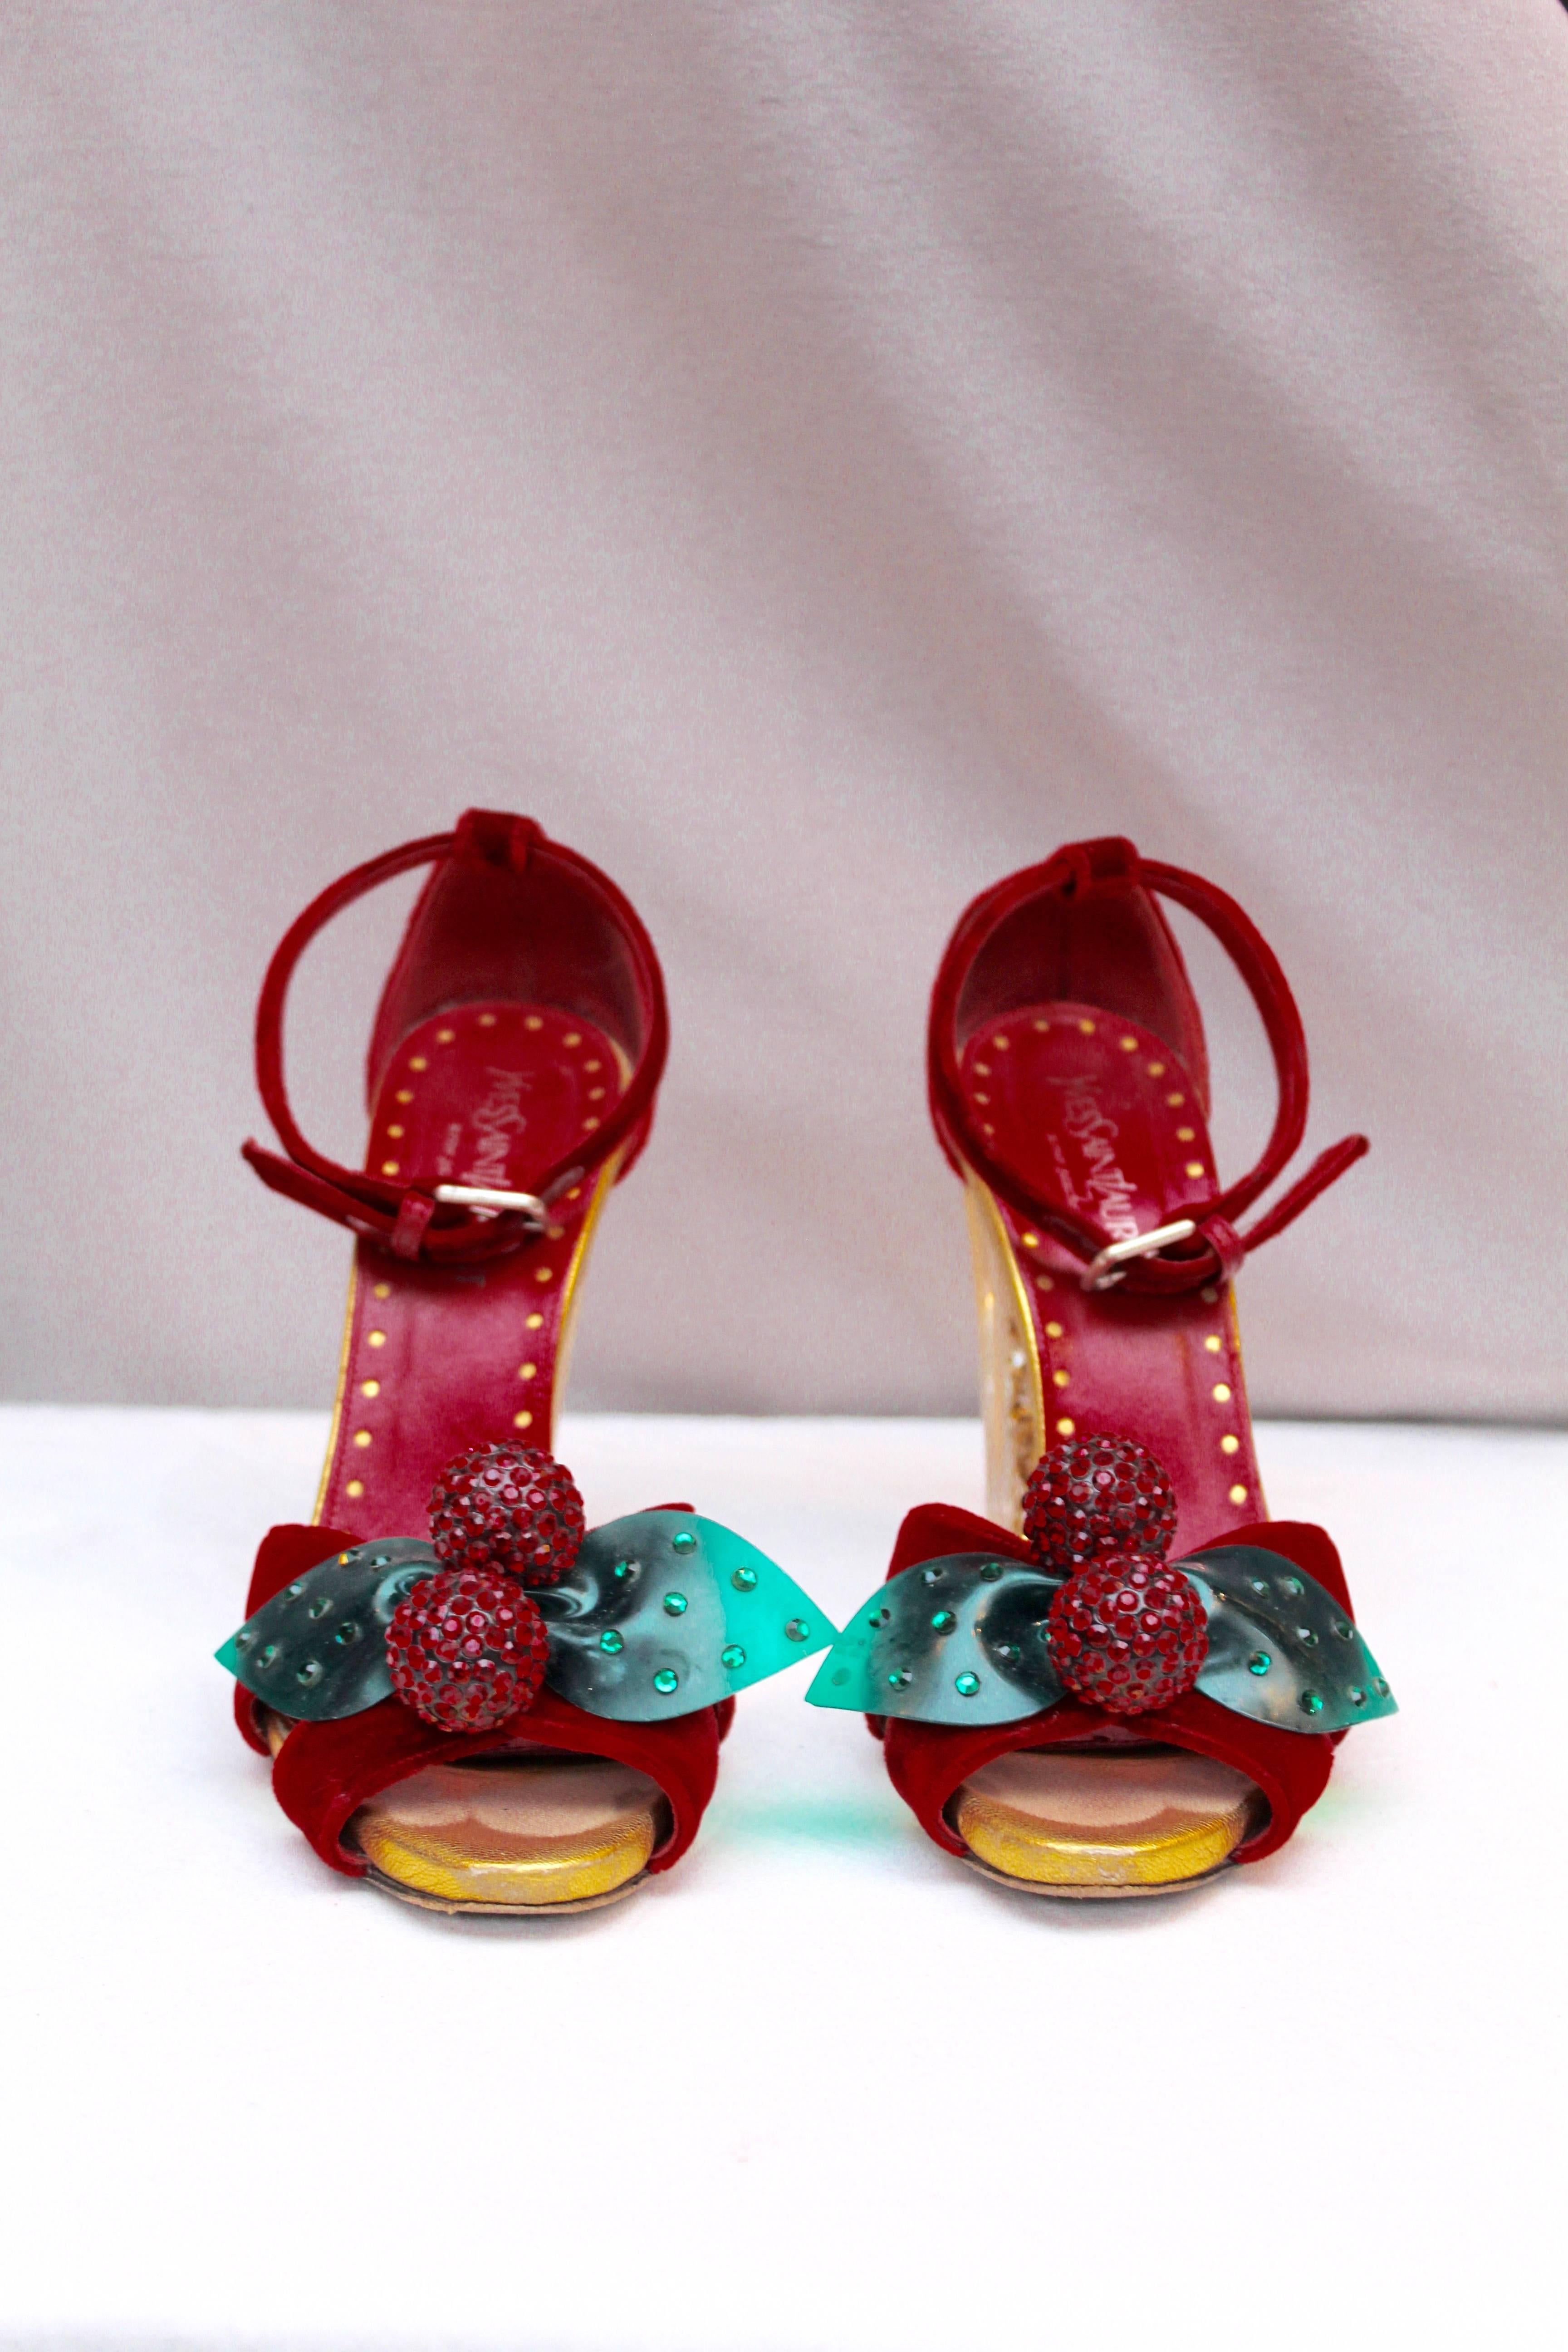 YVES SAINT LAURENT (Made in France) Splendid red velvet evening open toe sling-back pumps. The tips are decorated with two red rhinestones spheres and two green leaves, representing cherries. The heel is made of Lucite and rhinestones.

Size